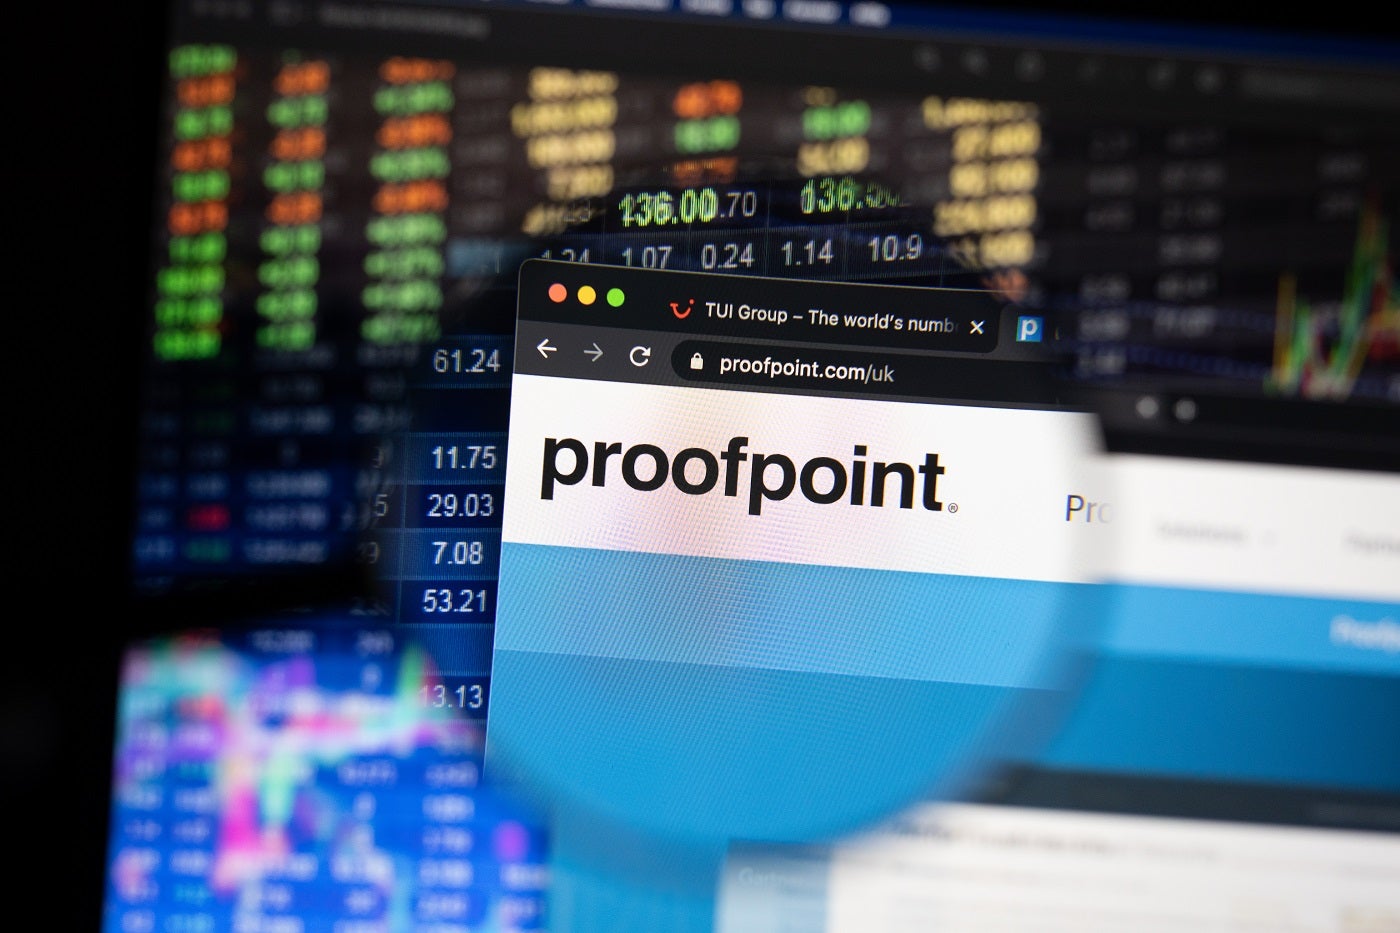 Proofpoint Exposes Sophisticated Social Engineering Attack on Recruiters That Infects Their Computers With Malware